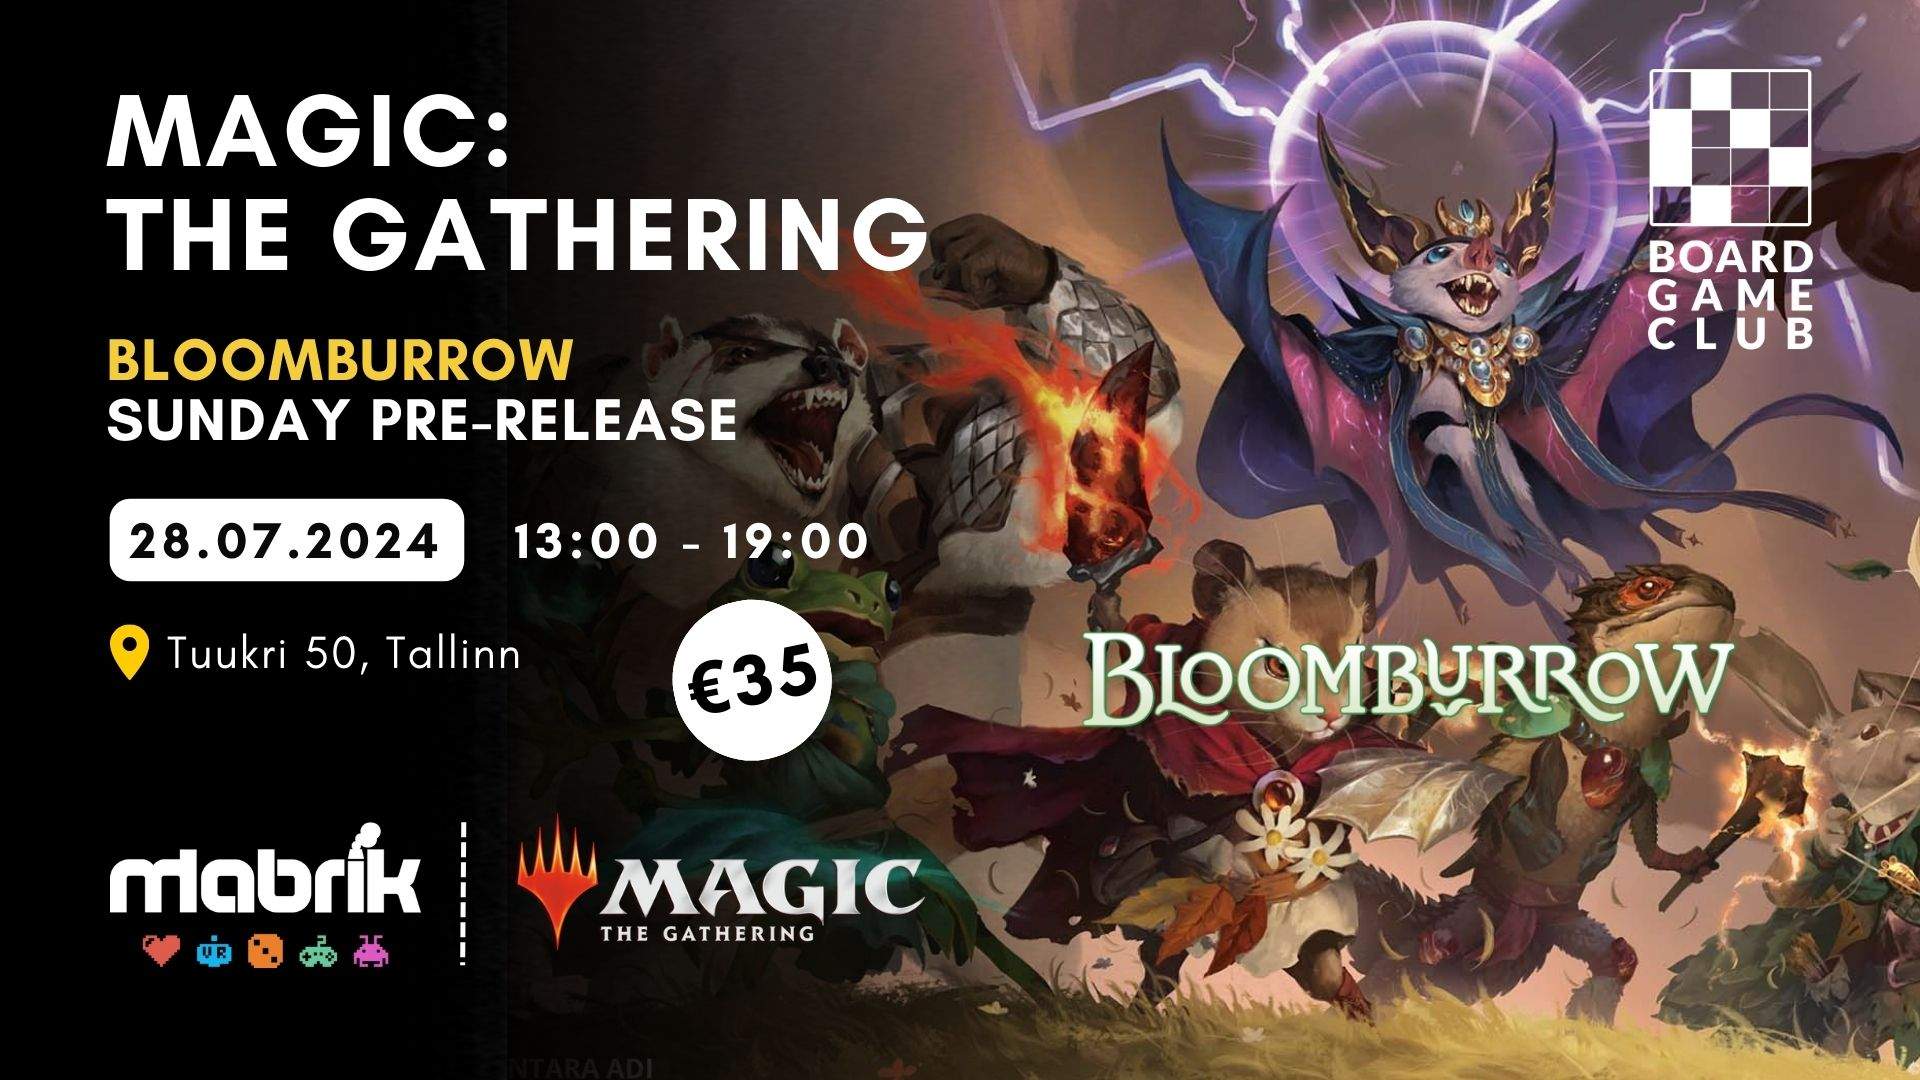 Events - 28.07.2024 - MTG: Bloomburrow - Sunday pre-release